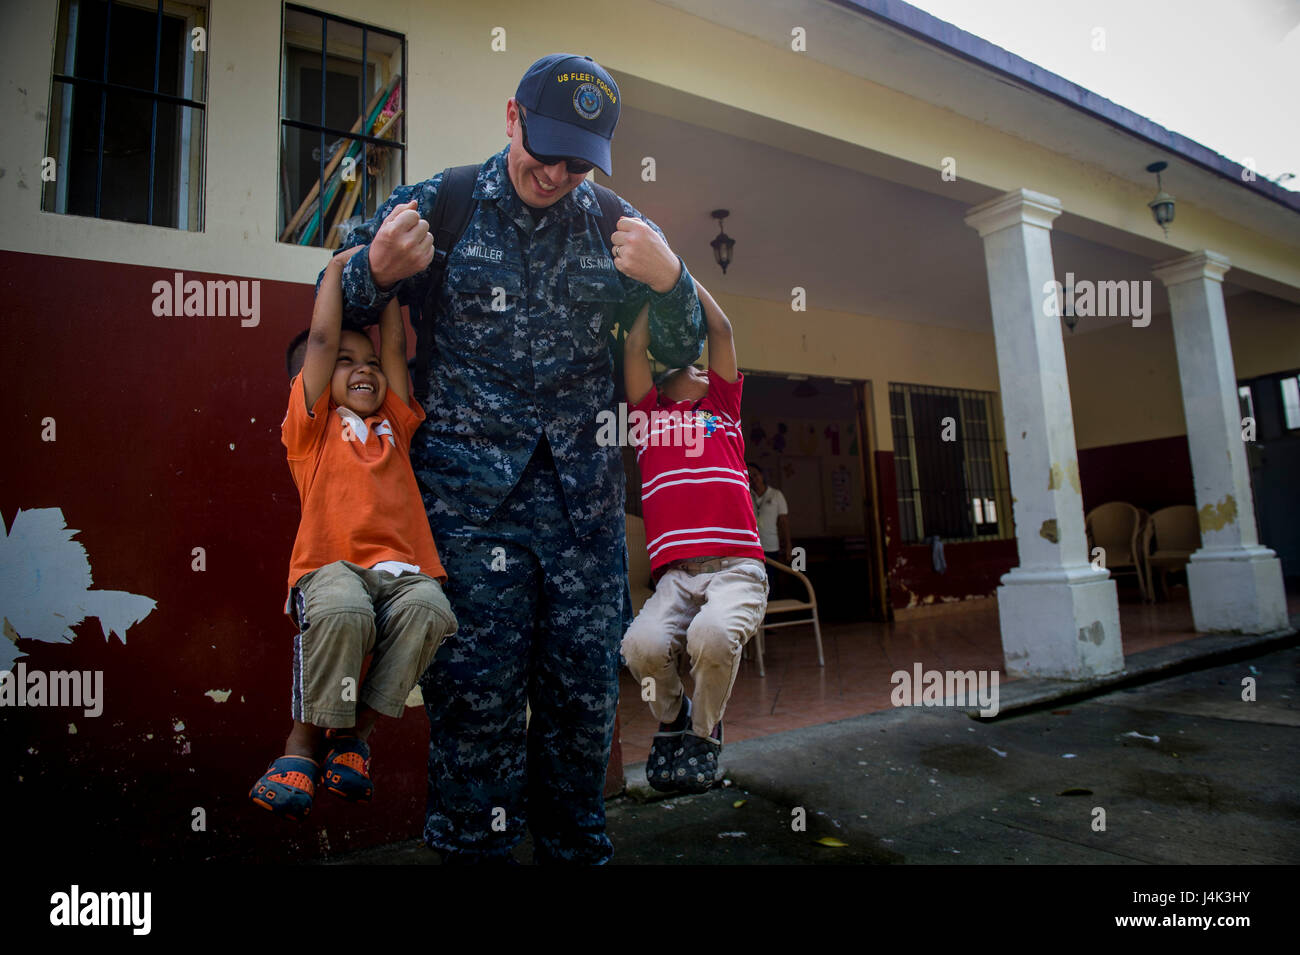 170206-N-YL073-041   PUERTO BARRIOS, Guatemala (Feb. 6, 2017) Musician 3rd Class Ryan Miller, assigned to U.S. Fleet Forces Band, plays with host nation children during a visit to an orphanage in support of Continuing Promise 2017 (CP-17) in Puerto Barrios, Guatemala. CP-17 is a U.S. Southern Command-sponsored and U.S. Naval Forces Southern Command/U.S. 4th Fleet-conducted deployment to conduct civil-military operations including humanitarian assistance, training engagements, and medical, dental, and veterinary support to Central and South America. (U.S. Navy photo by Mass Communication Specia Stock Photo